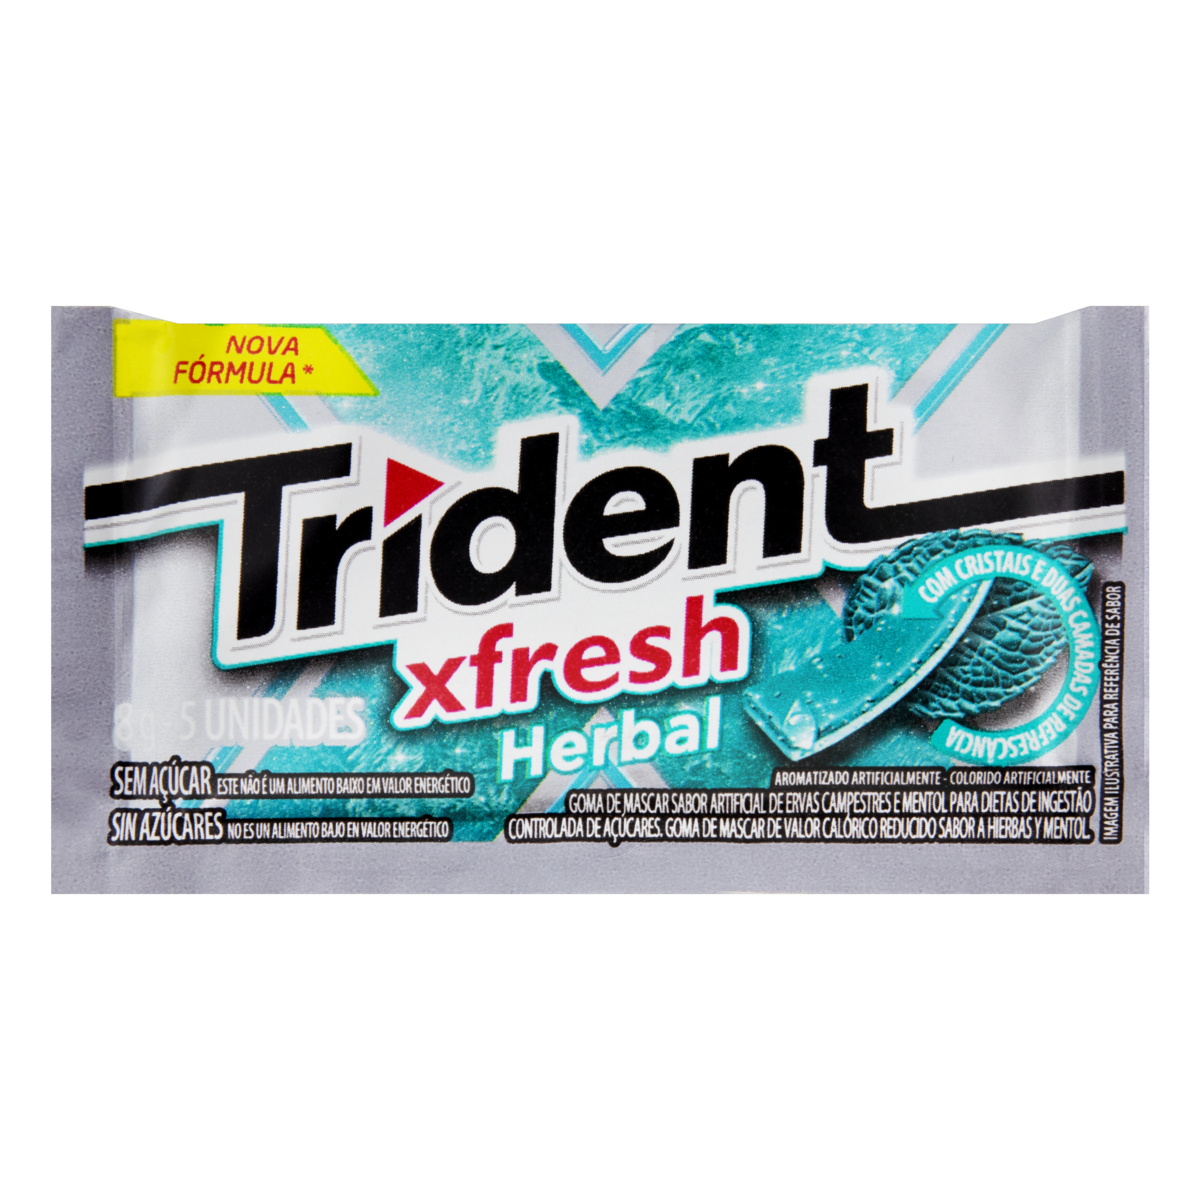 7895800400210 - CHICLE TRIDENT HERBAL FRESH 21UNIDADE X 8,5G